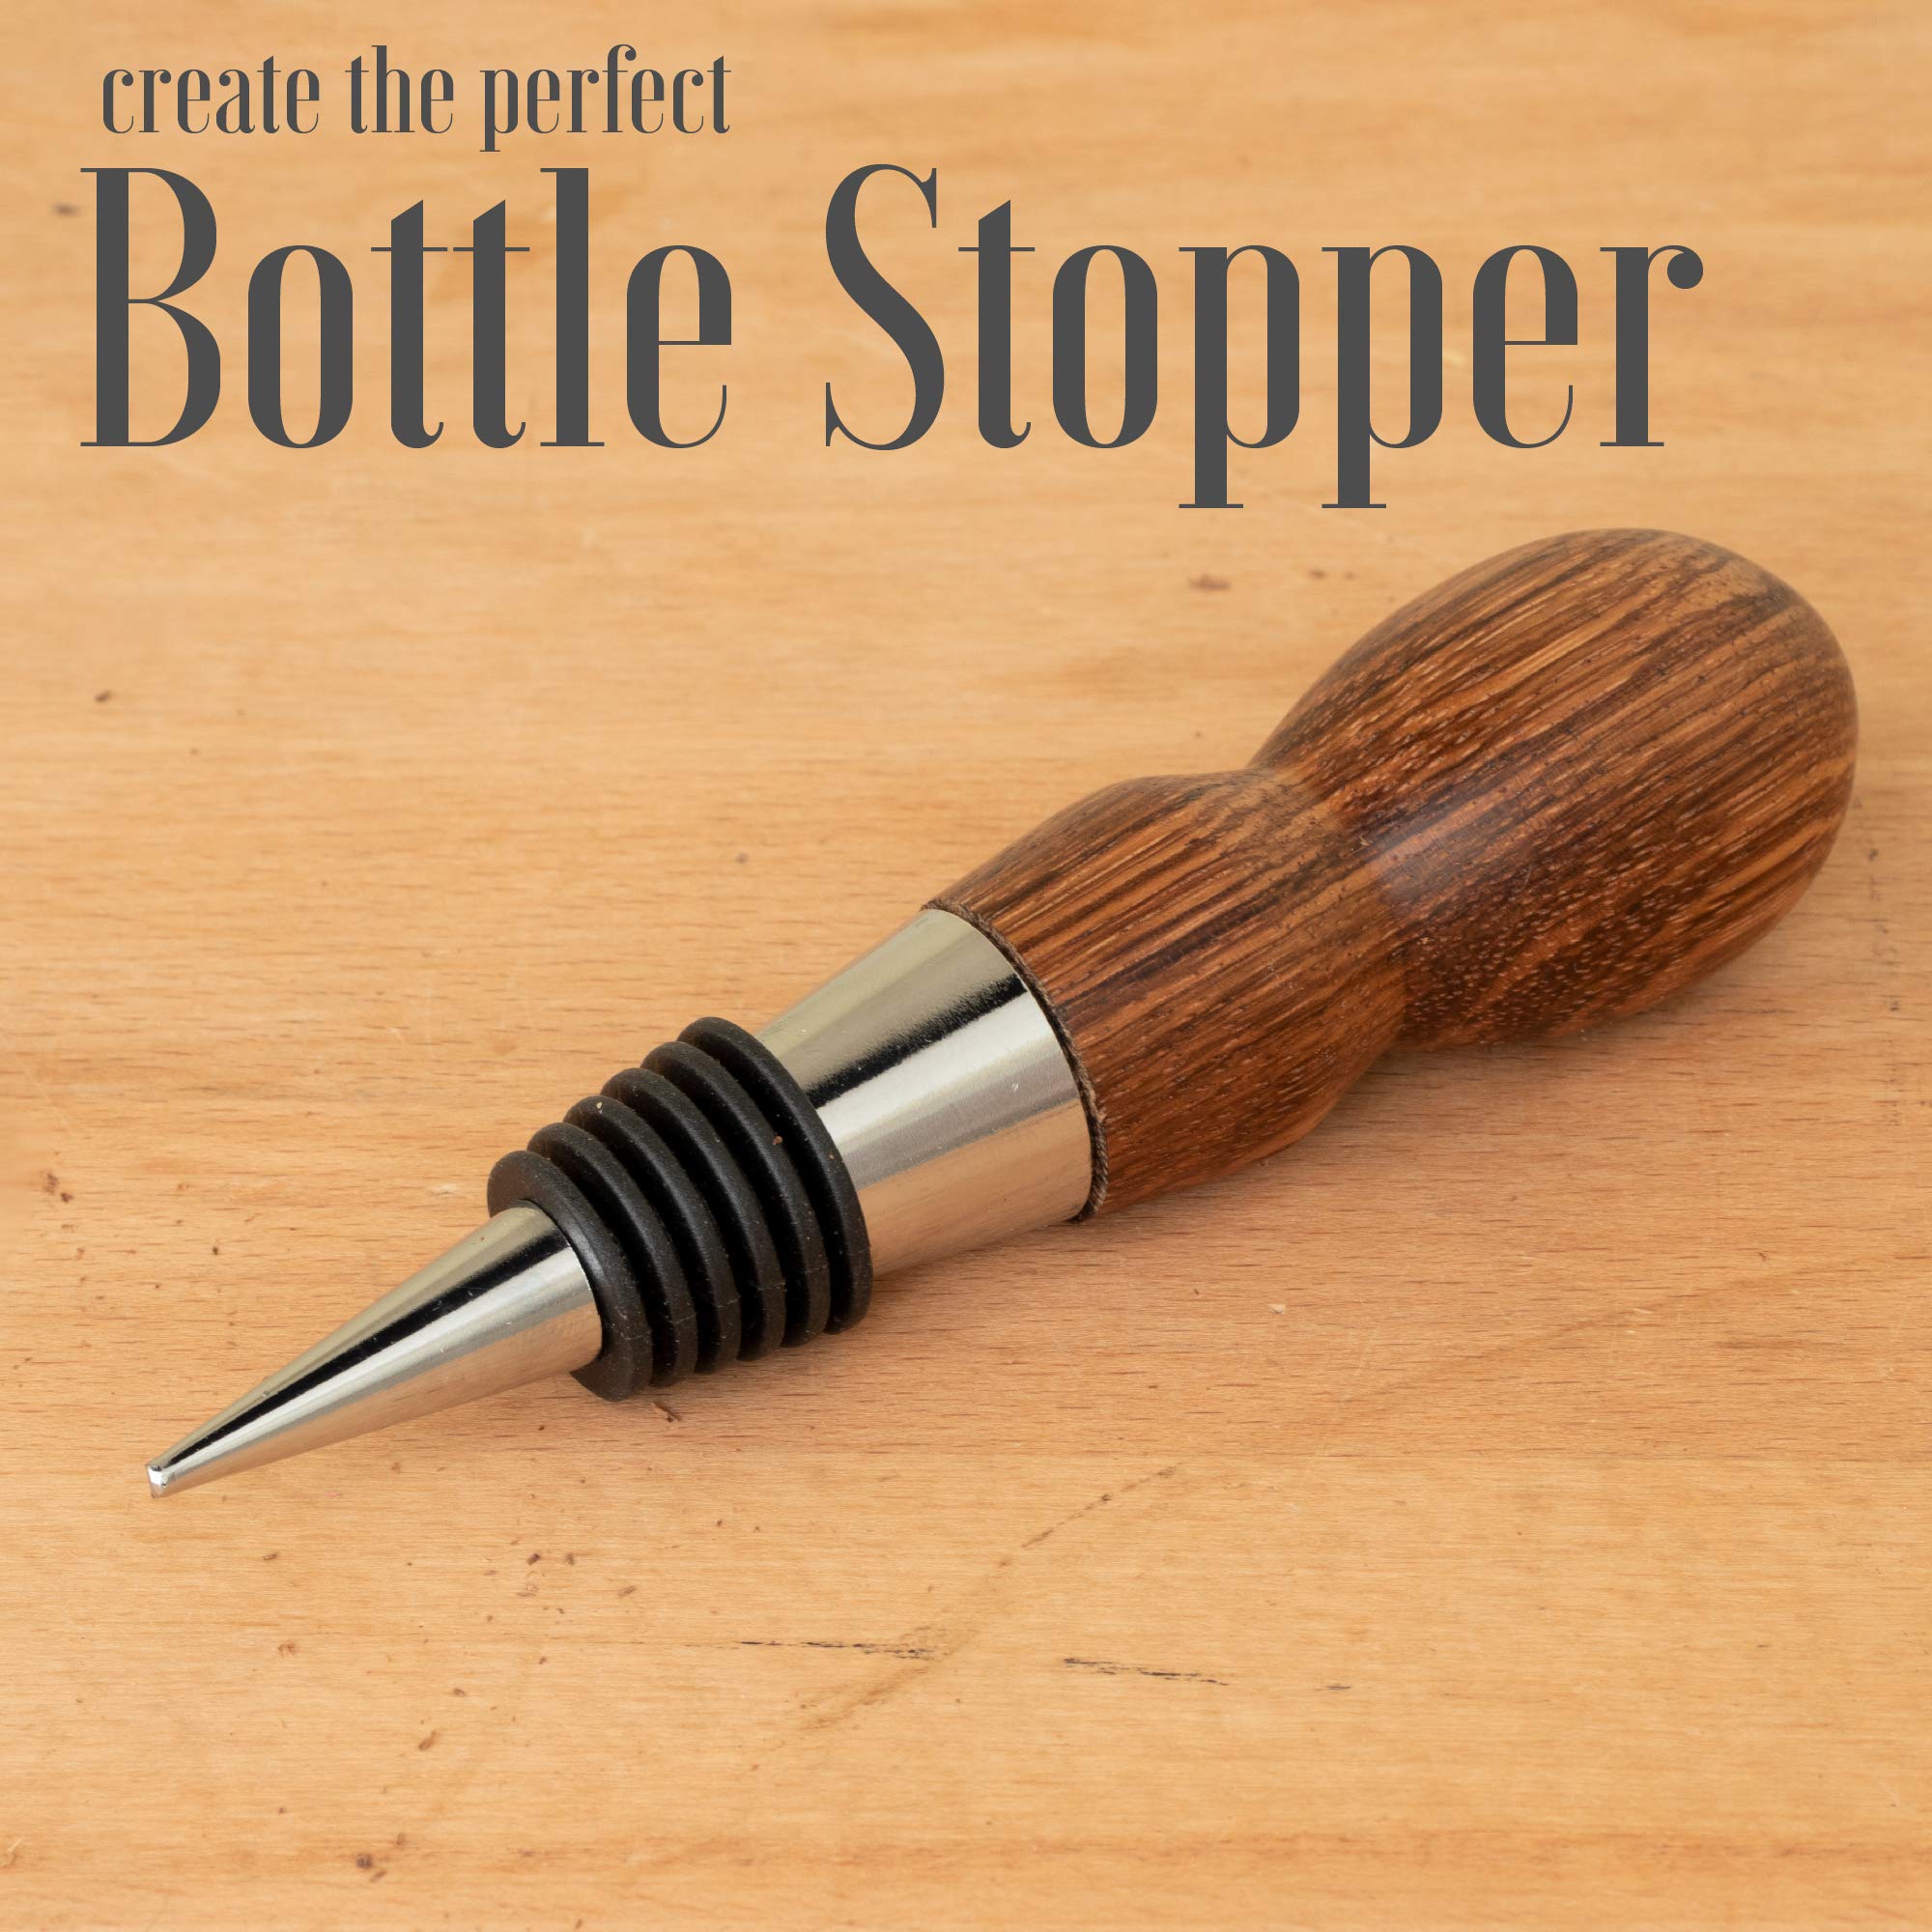 Classic Chrome Style Bottle Stopper with 3/8” x 16 tpi Threaded Post For Attaching Hand Made or Lathe Turned Handles … (10 Chrome Stoppers)